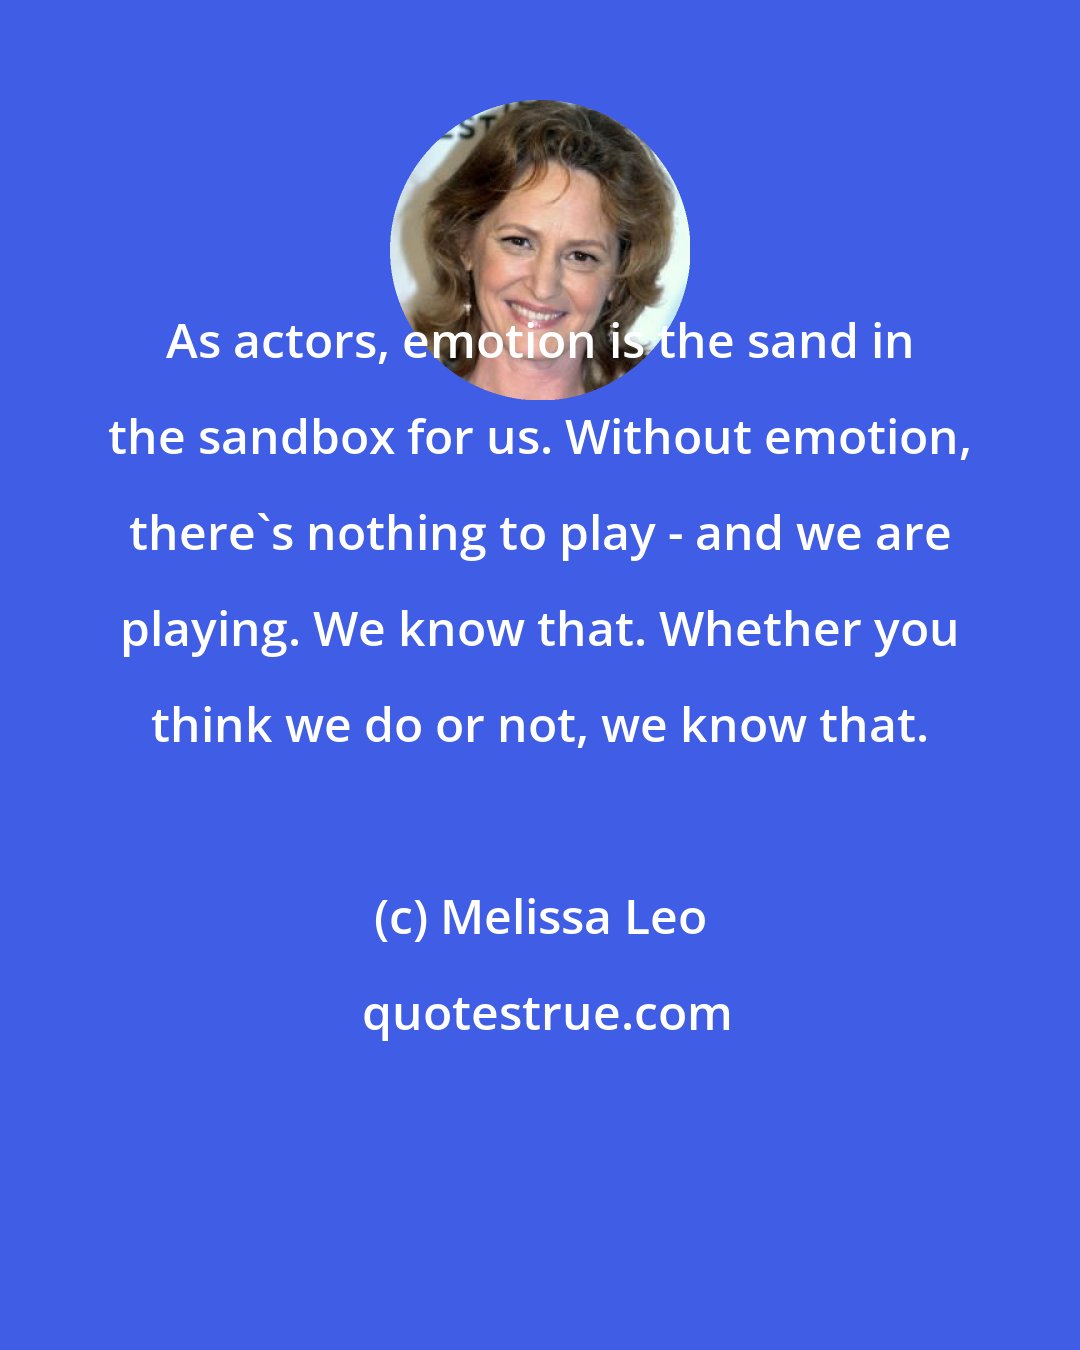 Melissa Leo: As actors, emotion is the sand in the sandbox for us. Without emotion, there's nothing to play - and we are playing. We know that. Whether you think we do or not, we know that.